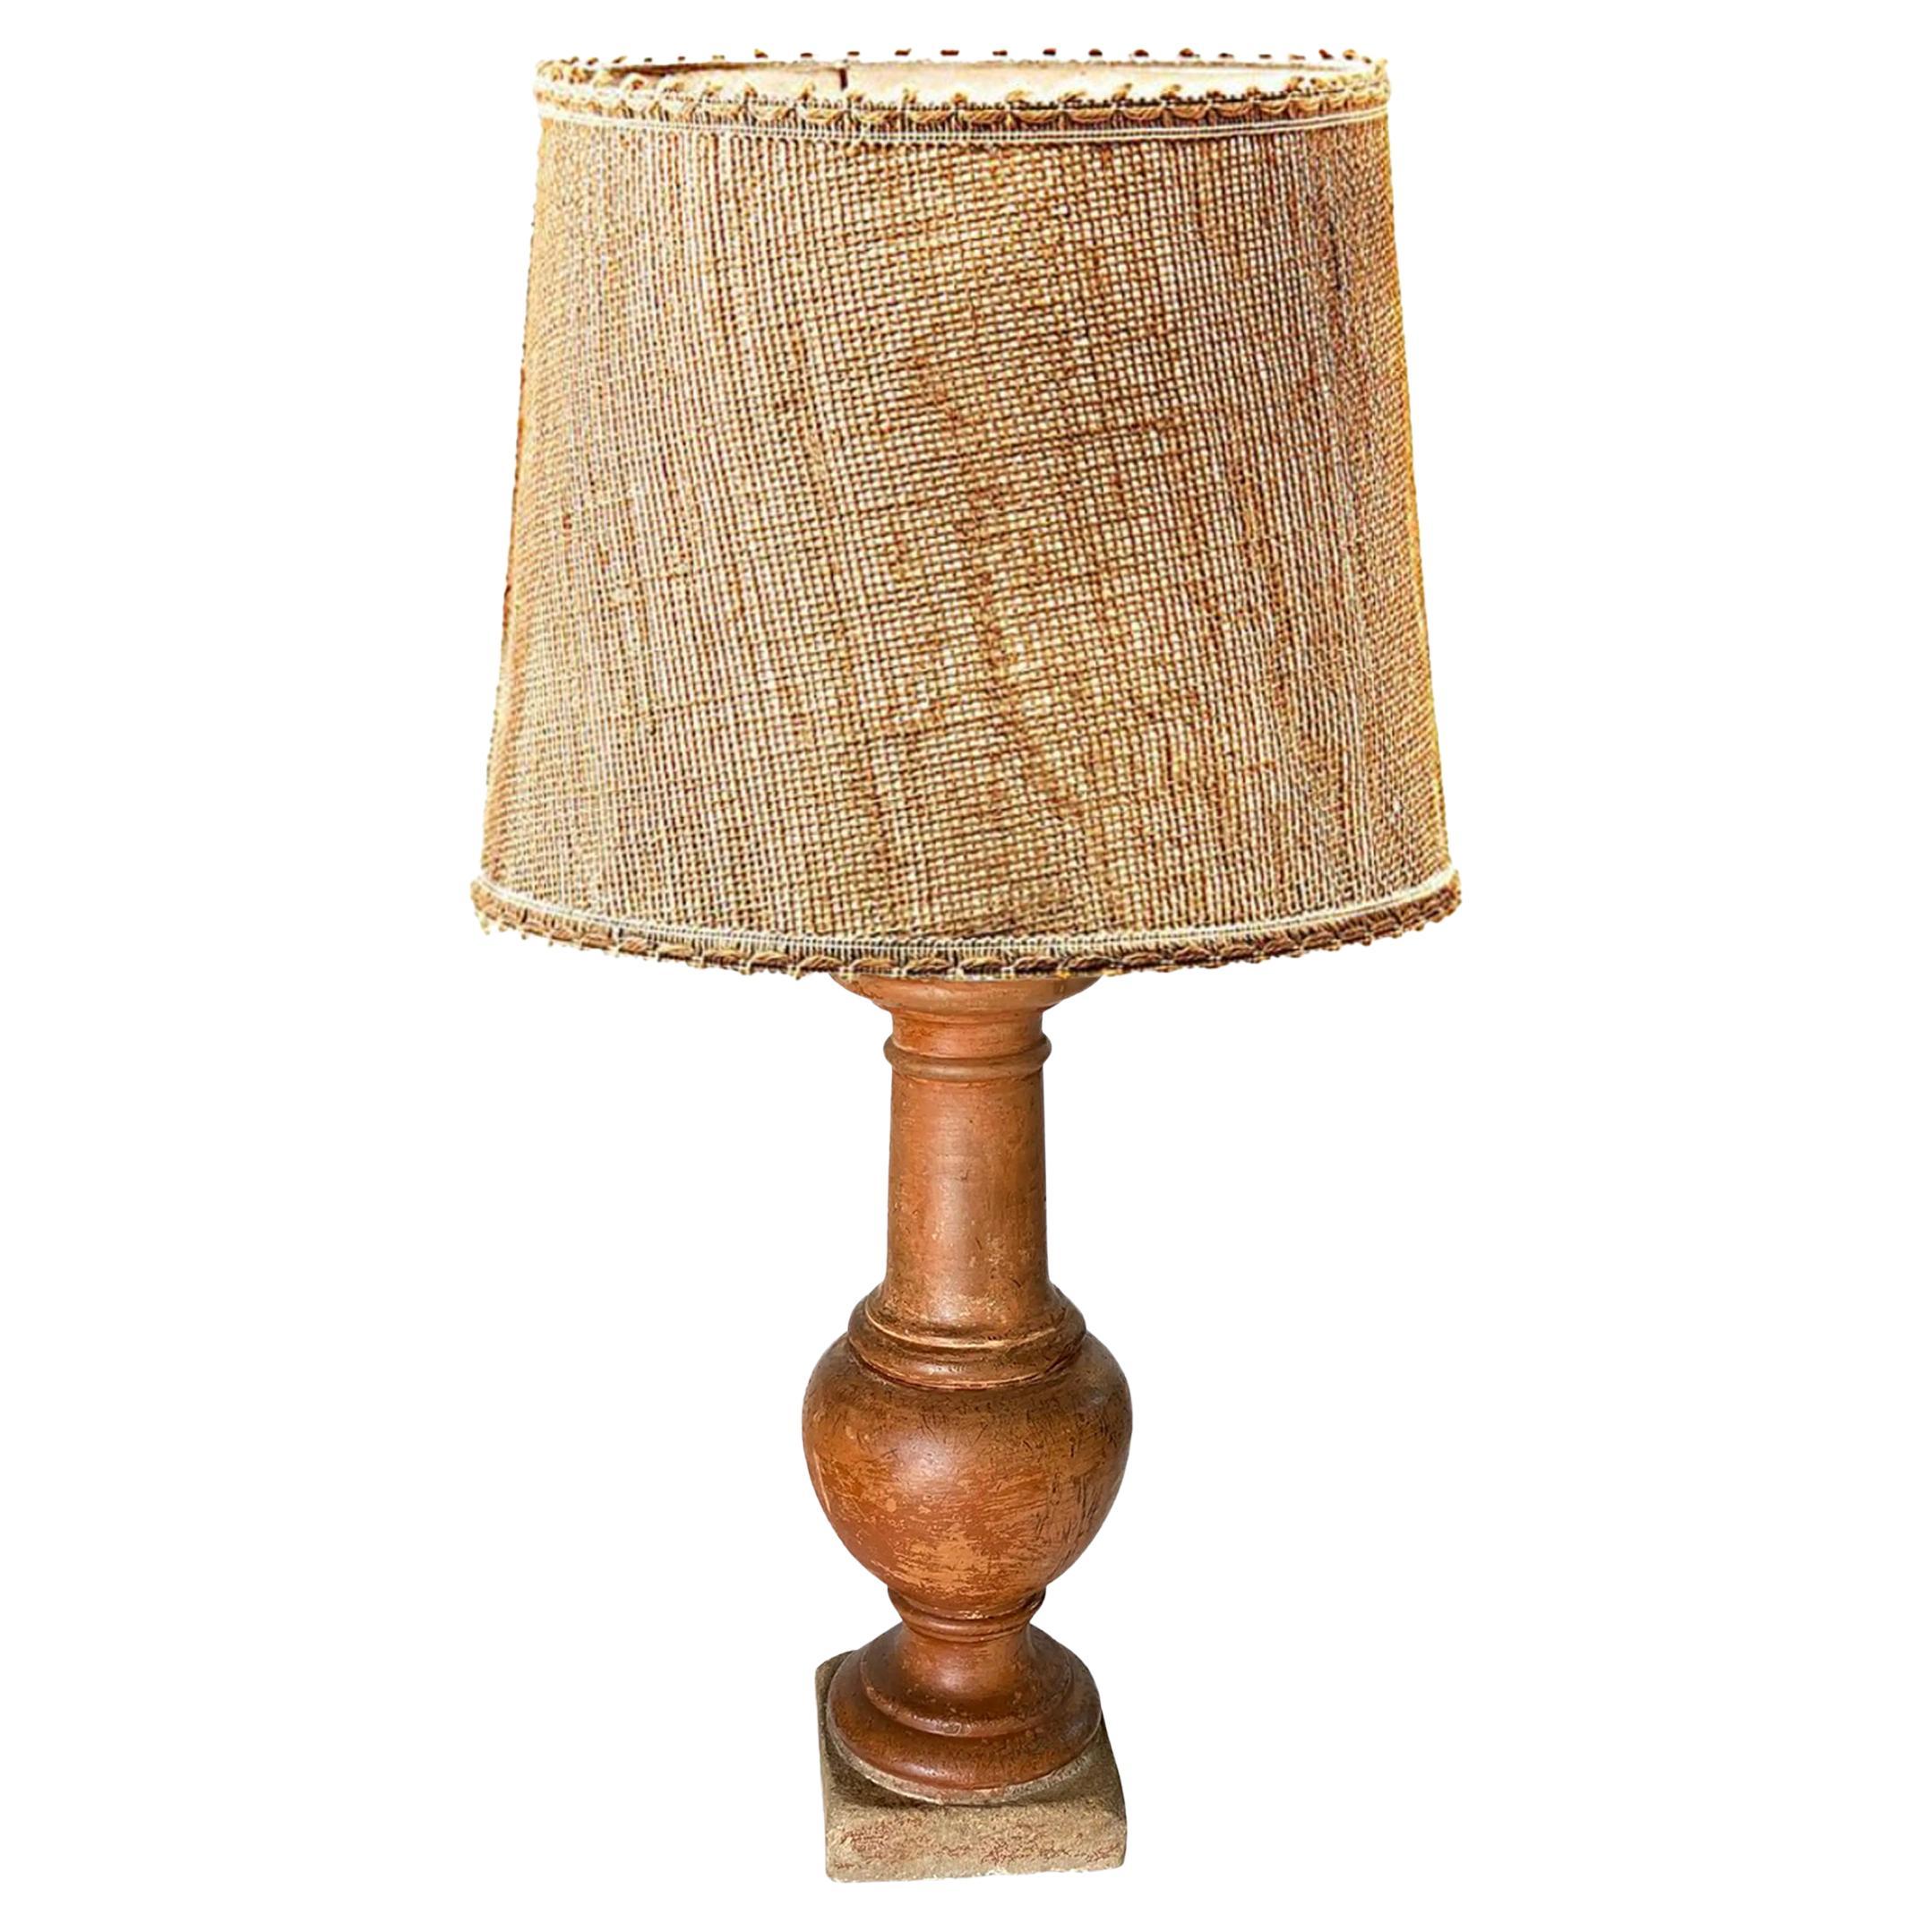 Tall French Neoclassical Terracotta Baluster Lamp, Brown Color, 19th Century